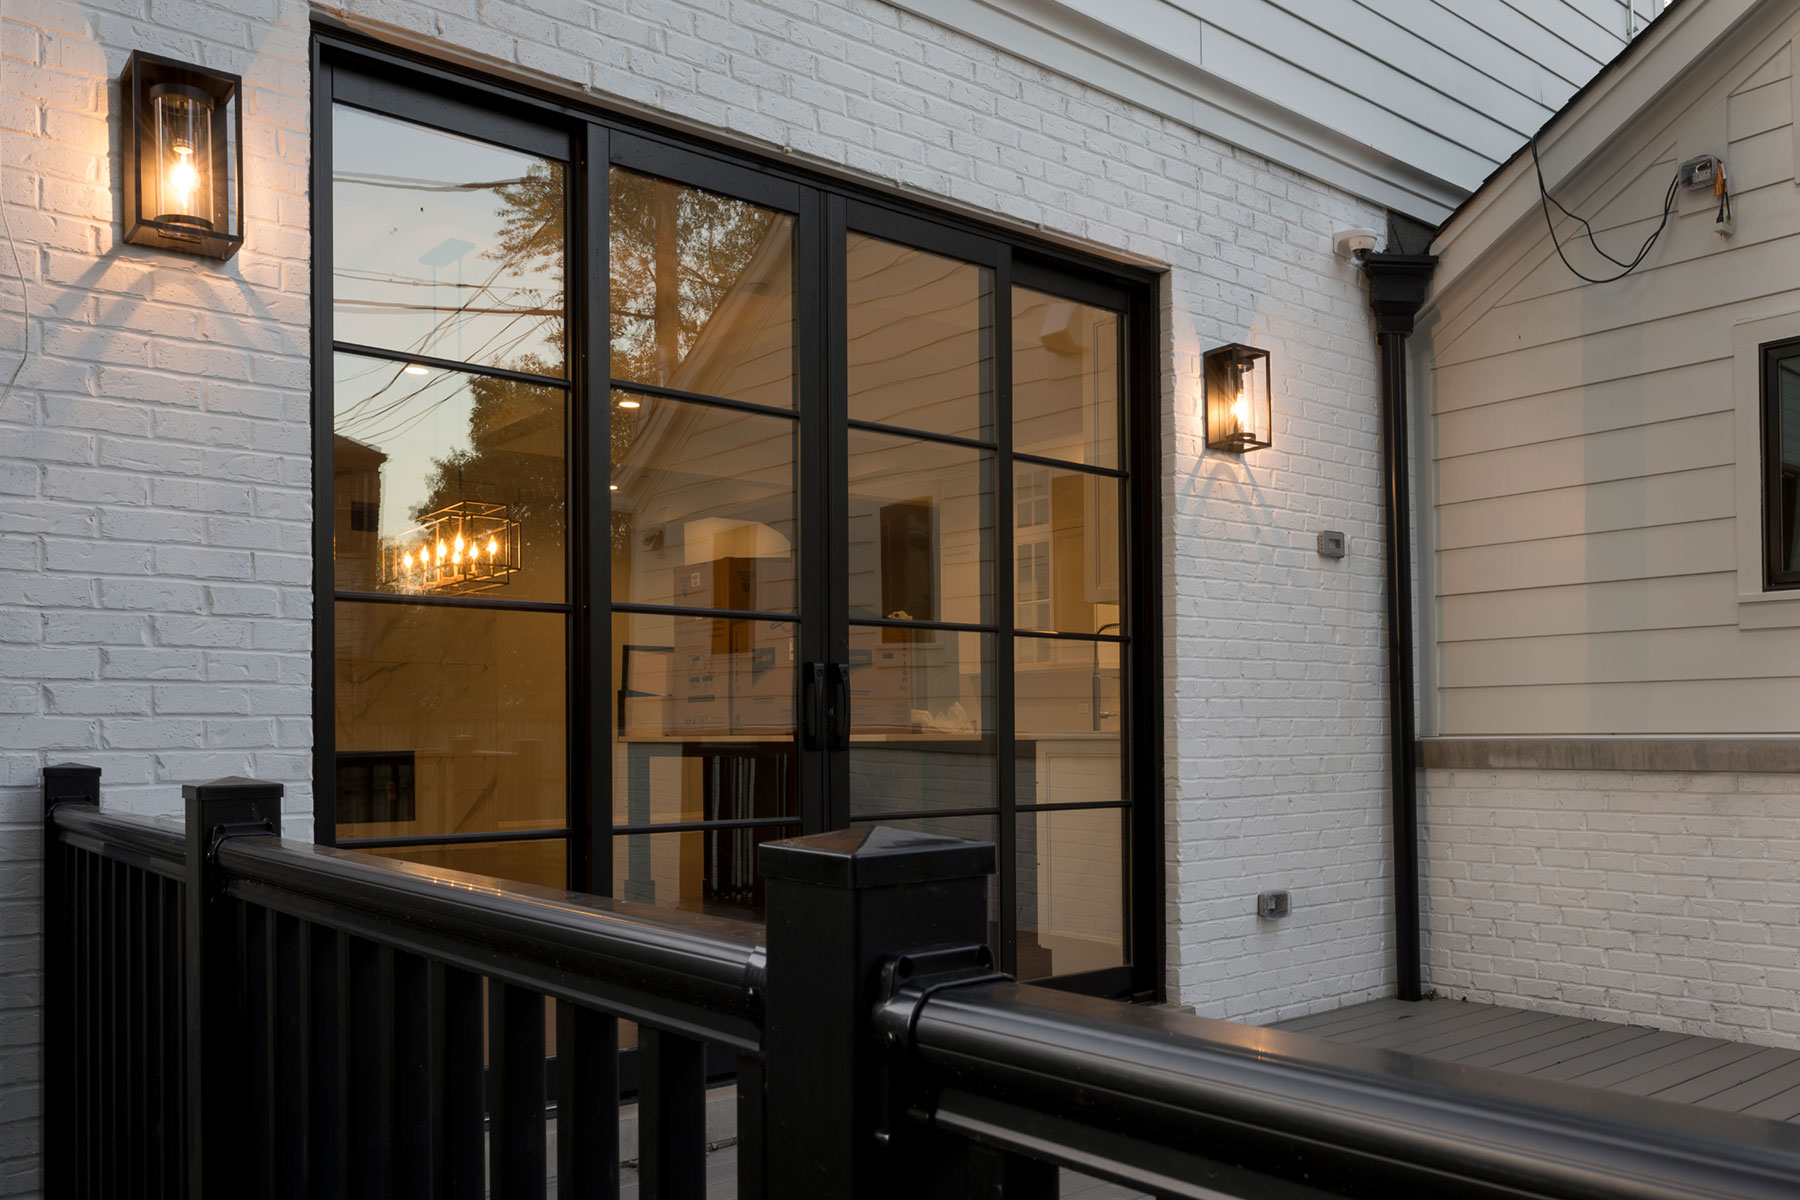 Patio Door - N. Francisco Ave., Chicago, IL Custom Home. America's Custom Home Builders: New Construction, Remodeling, Restoration Services. Residential and Commercial.